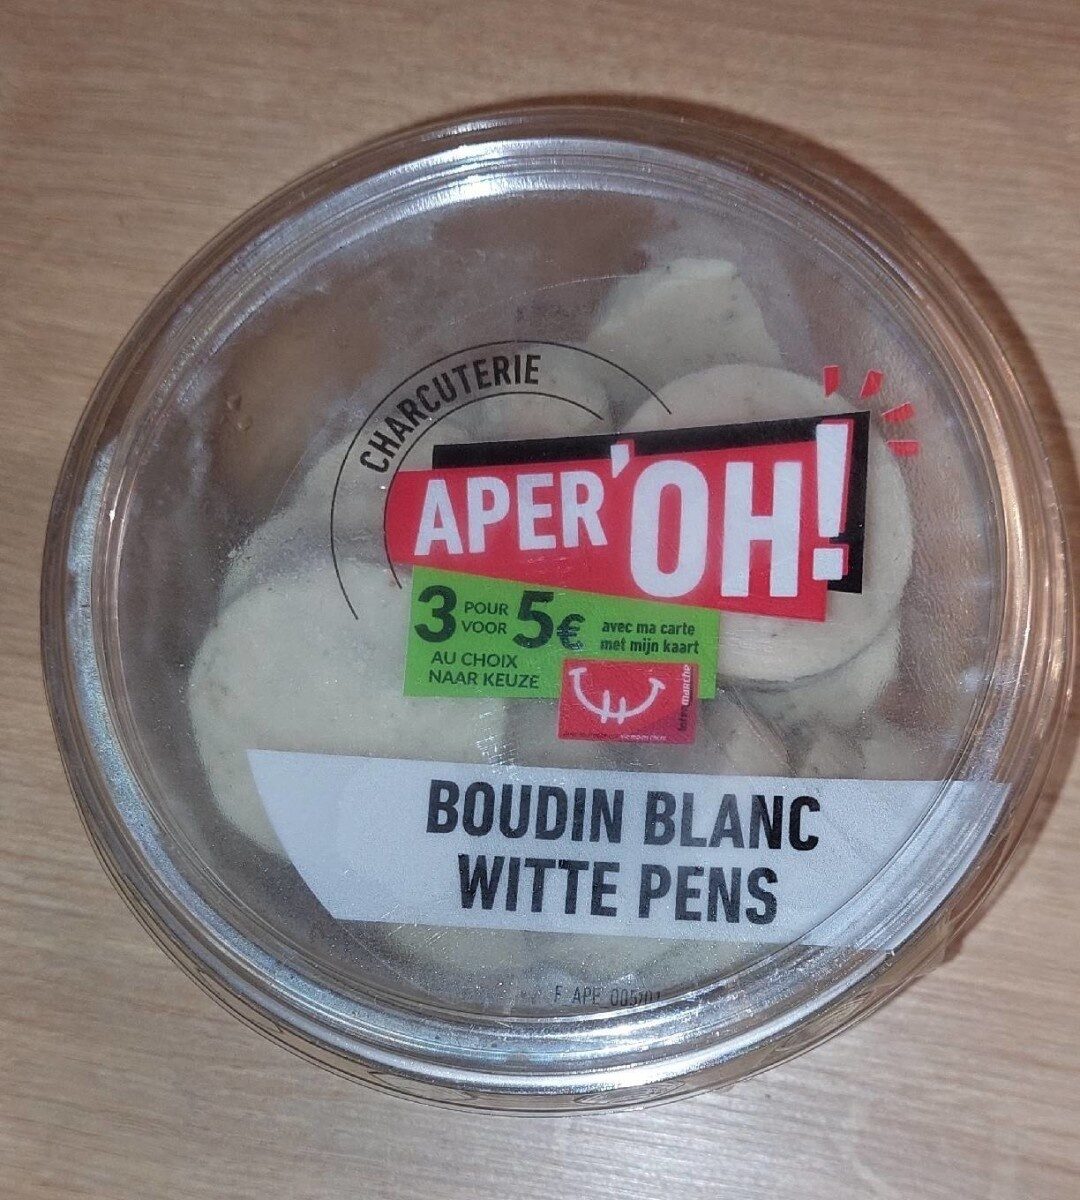 Aper'oh boudin blanc - Product - fr